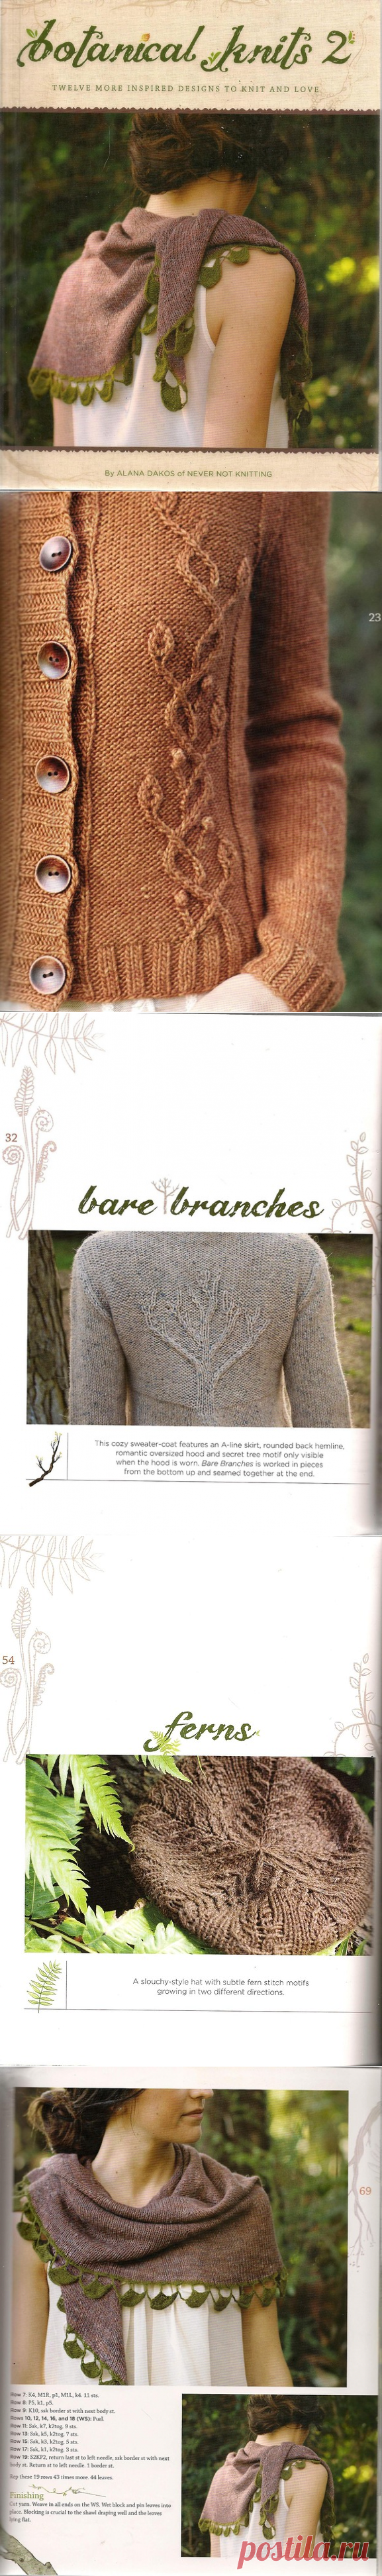 Botanical Knits 2:Twelve More Inspired Designs to Knit and Love